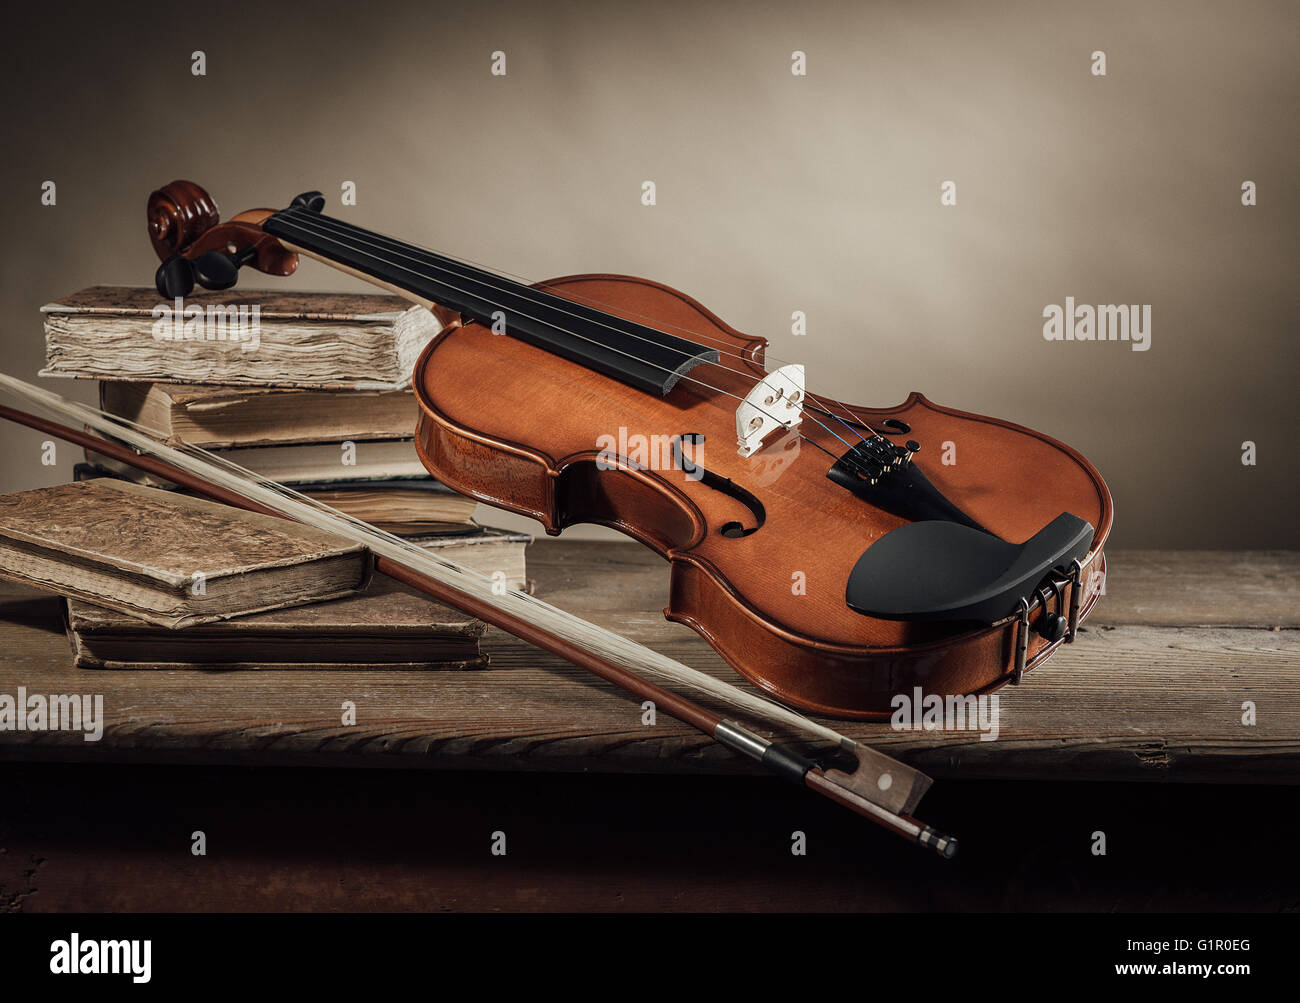 Old violin, bow and books on a rustic wooden table, still life Stock Photo